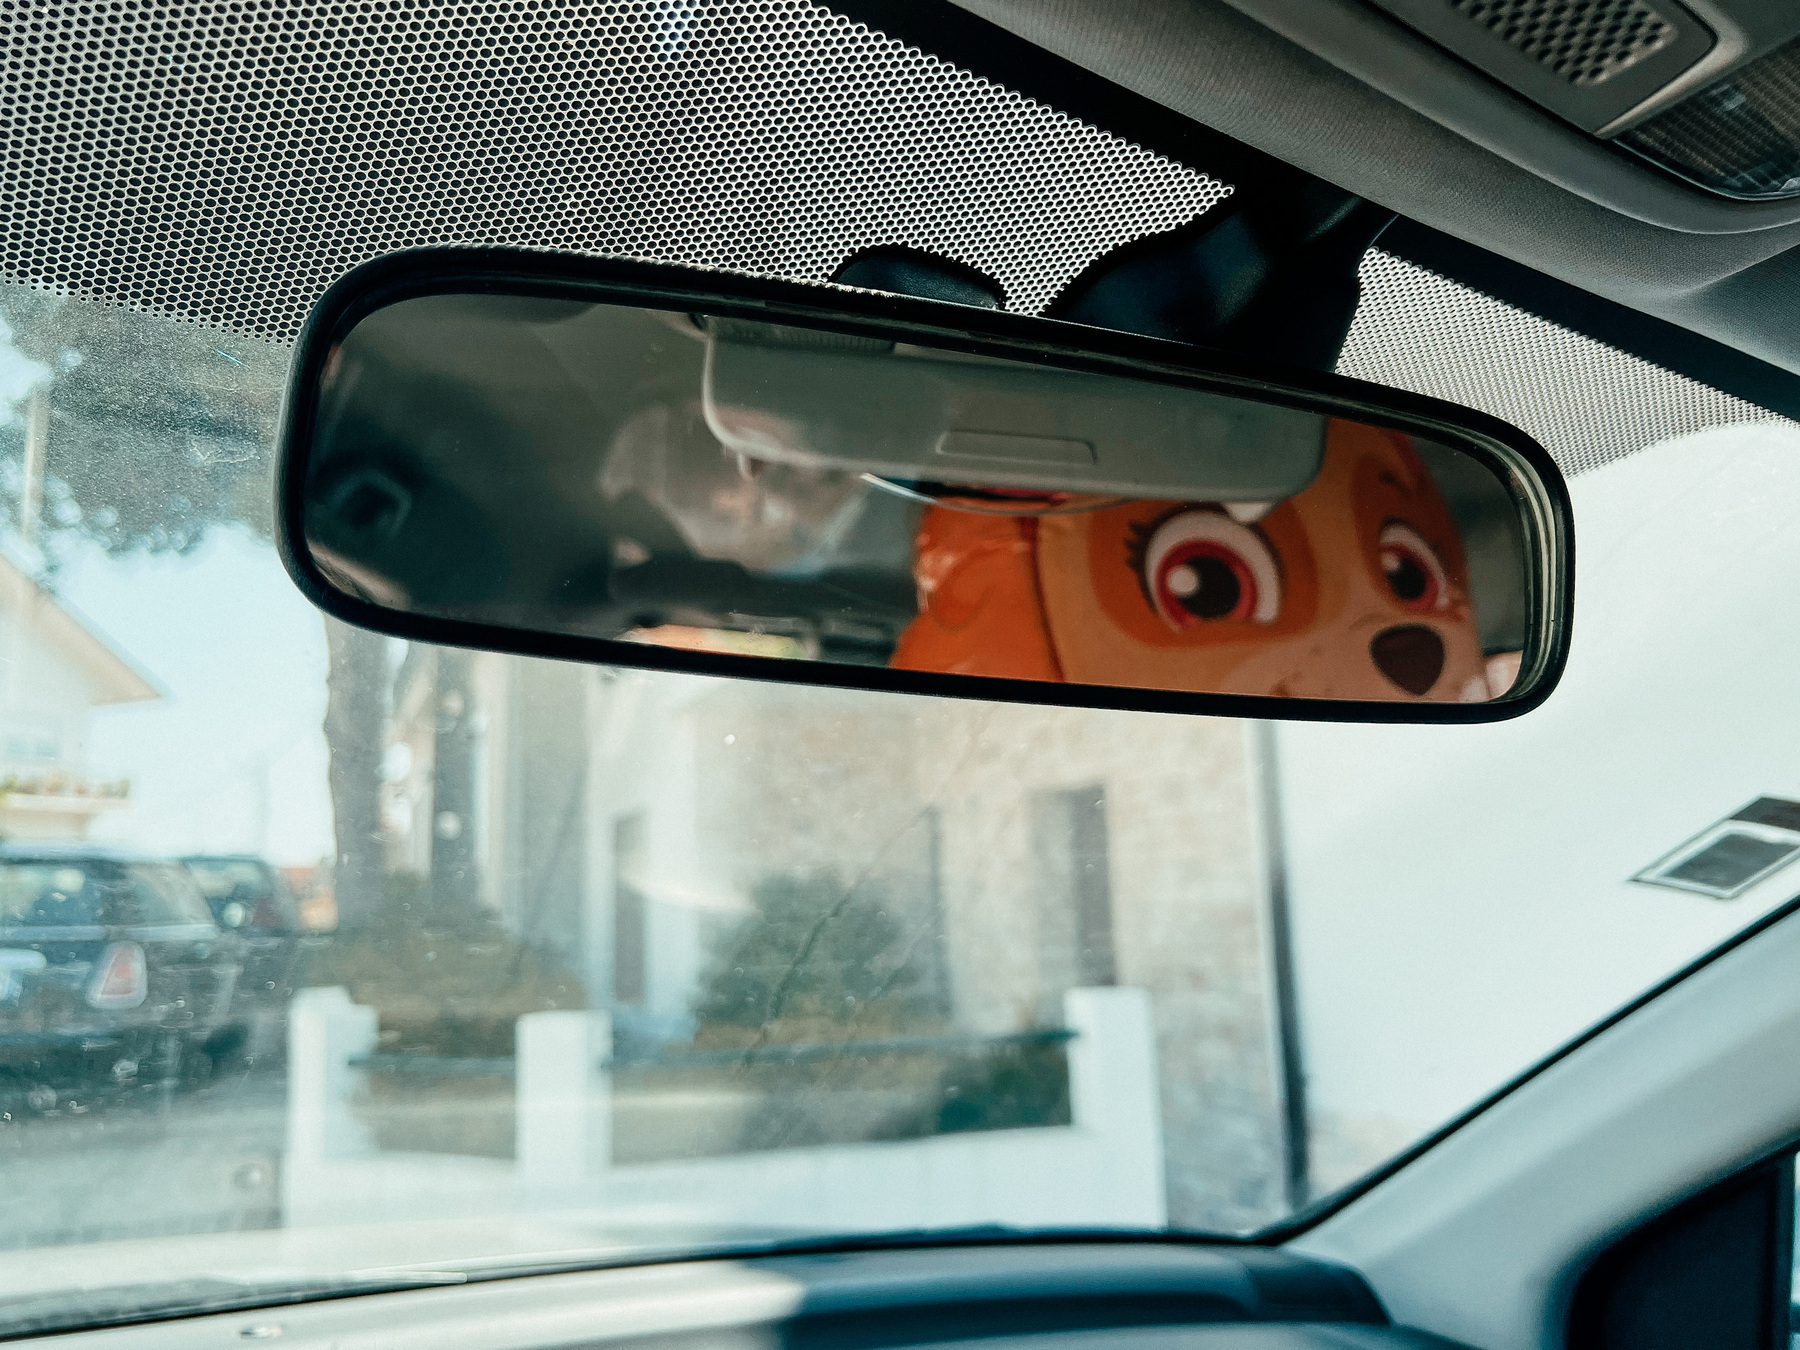 Rear view mirror on a car, with Skye from Paw Patrol looking over my shoulder 